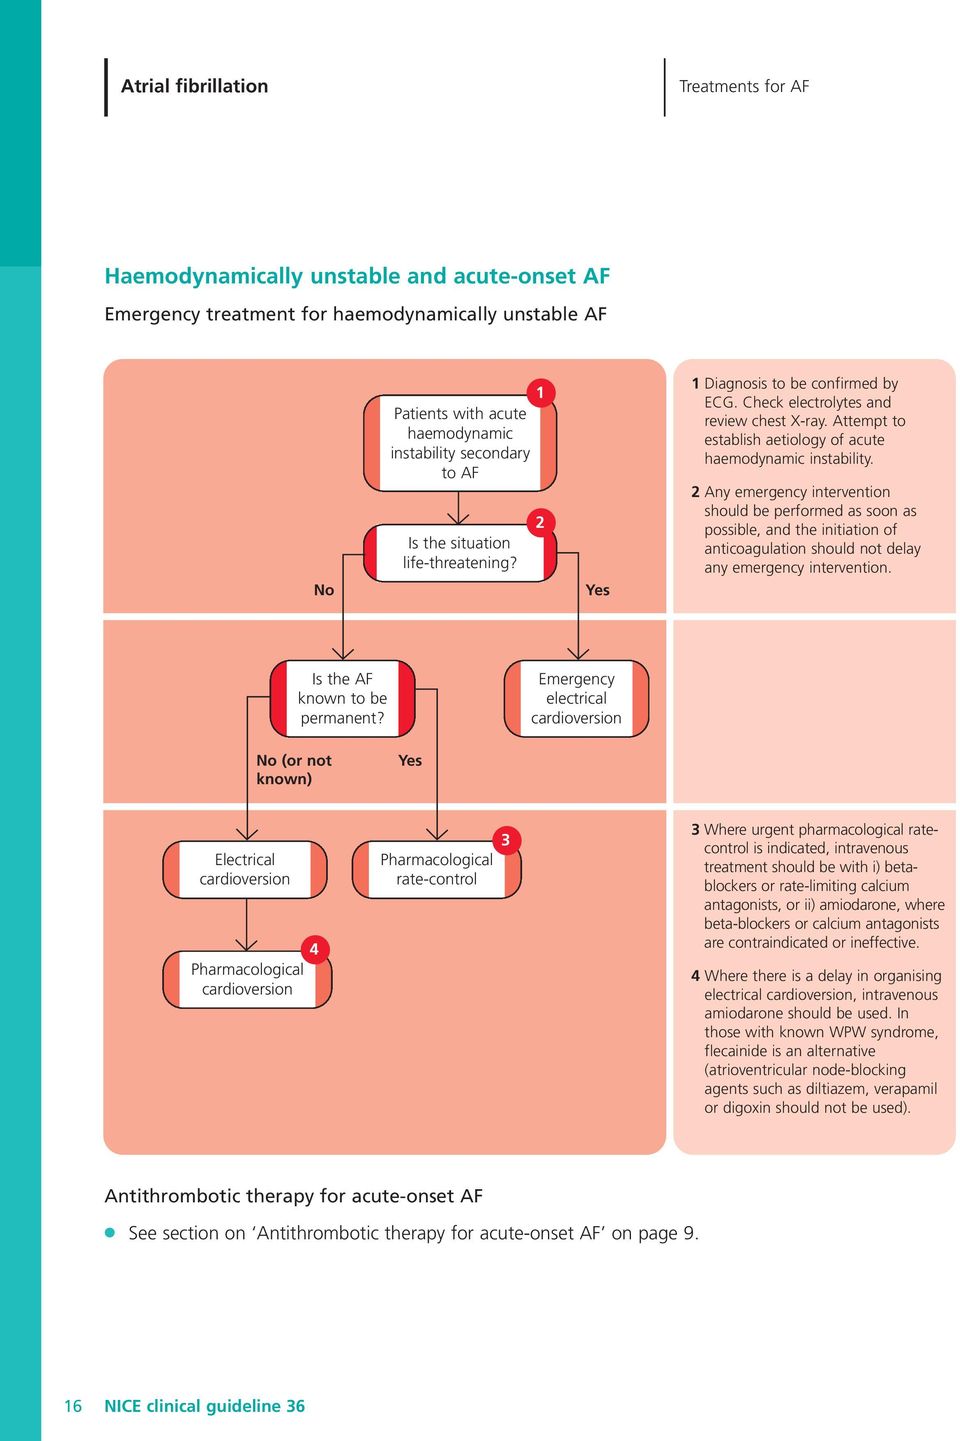 2 Any emergency intervention should be performed as soon as possible, and the initiation of anticoagulation should not delay any emergency intervention. Is the AF known to be permanent?